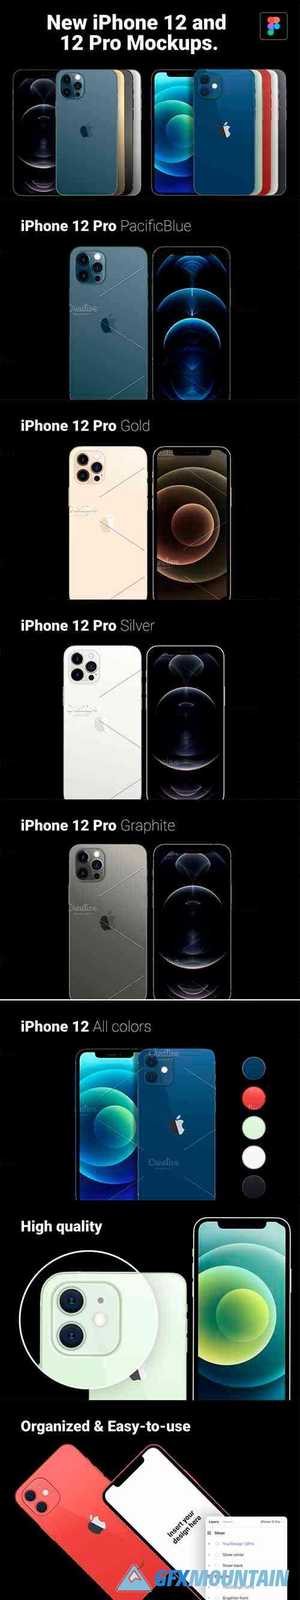 Mockups of the iPhone 12 Pro 5551102